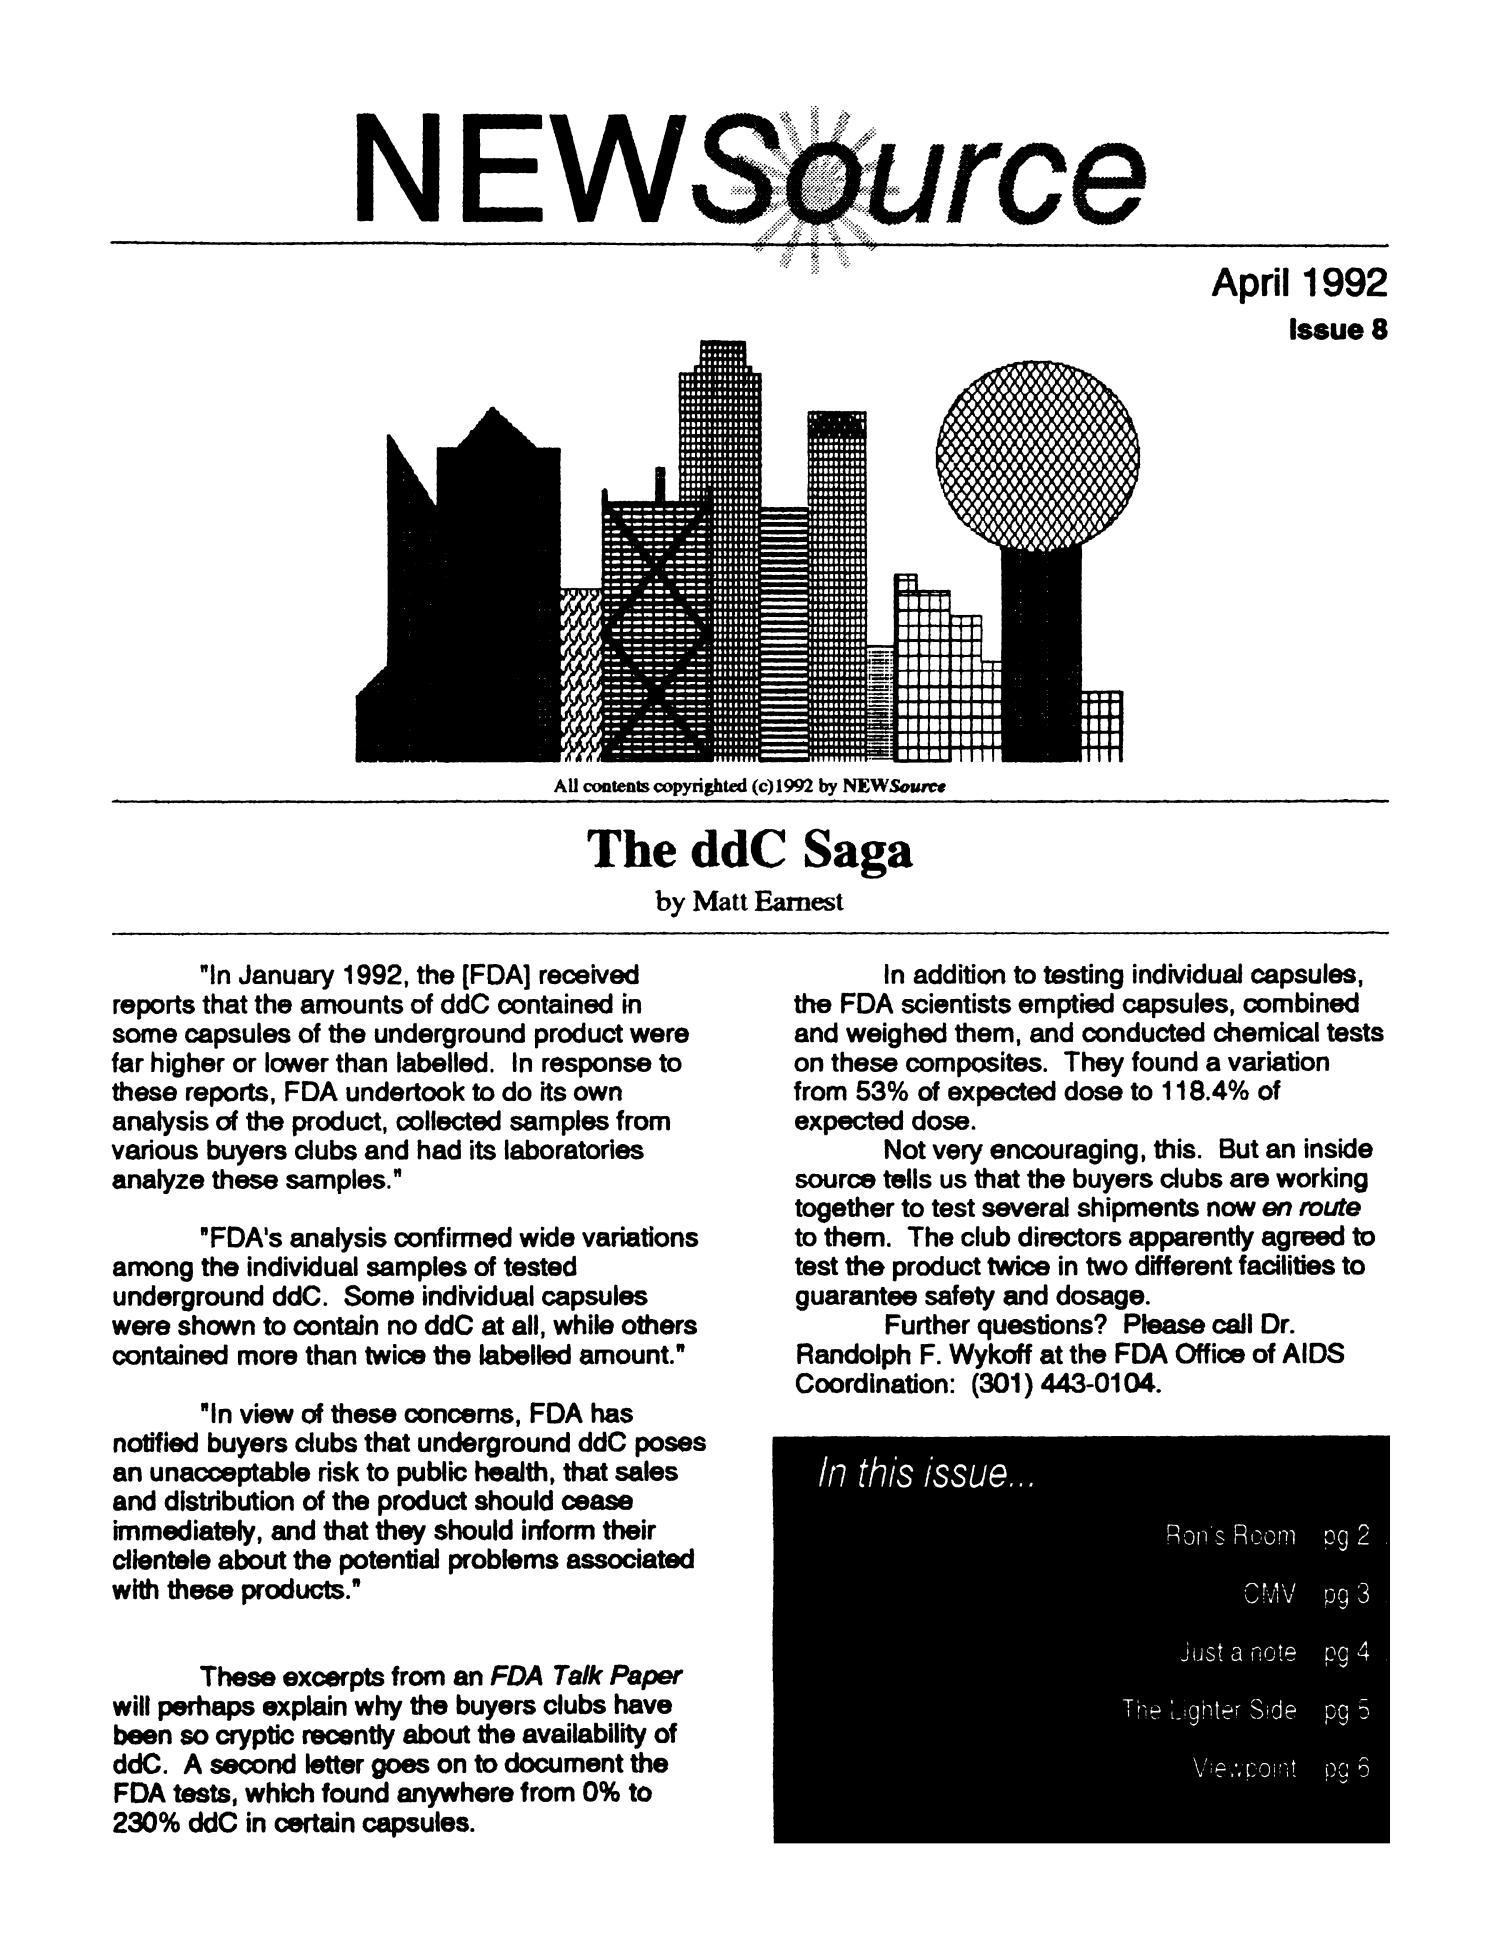 NEW Source, Issue 8, April 1992
                                                
                                                    1
                                                